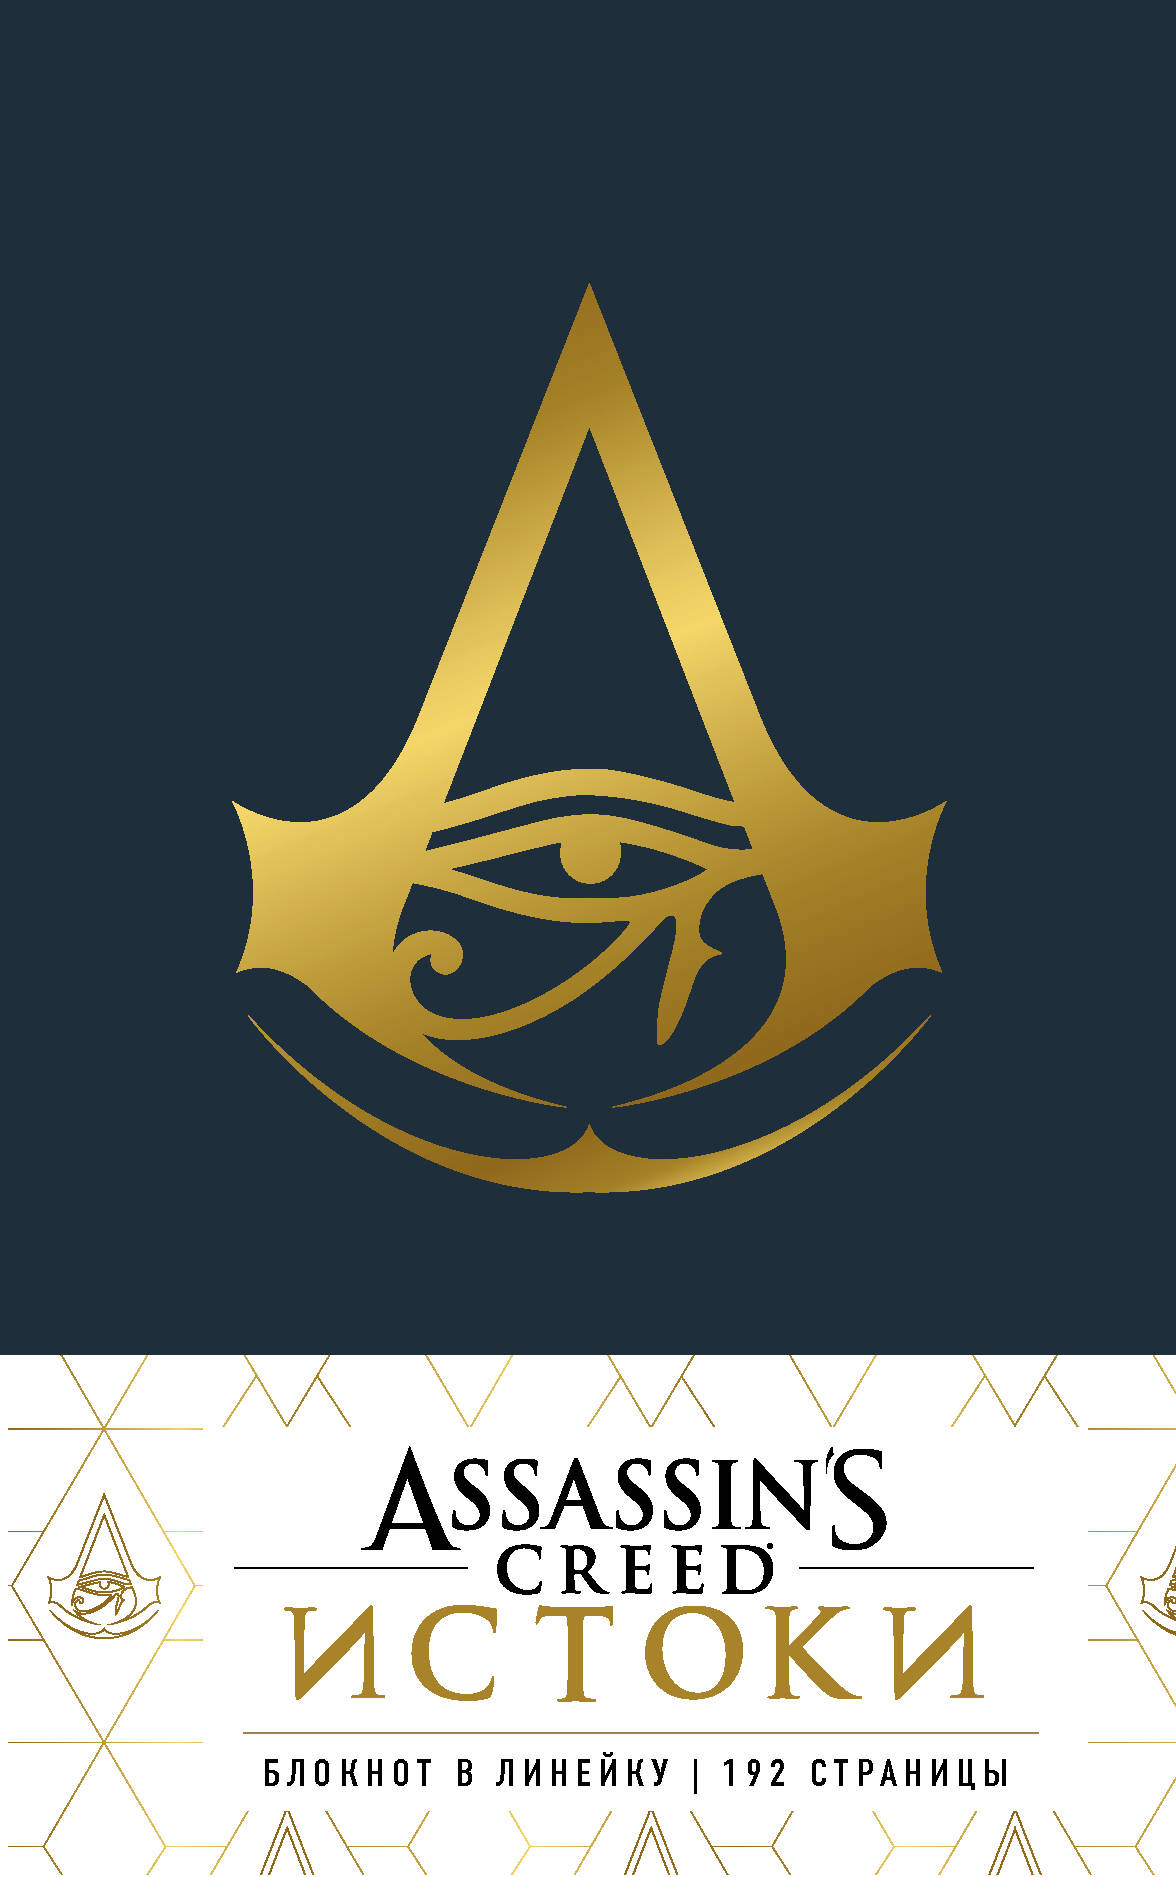  Assassin's Creed  - 